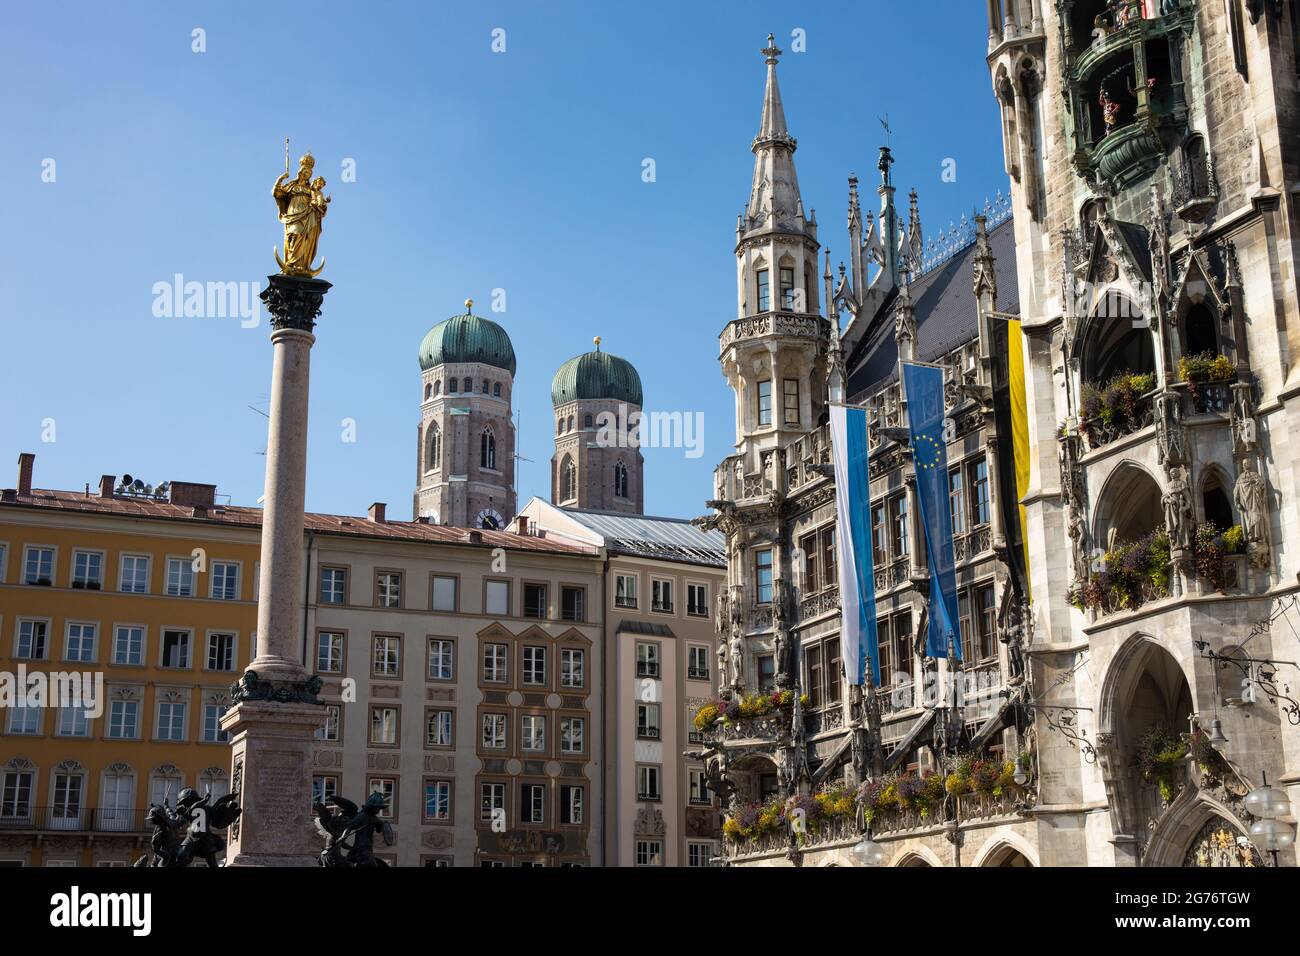 Munich Marienplatz with the city hall with the Glockenspiel, the Marian Column and in the background the Church of Our Lady (Frauenkirche) Stock Photo